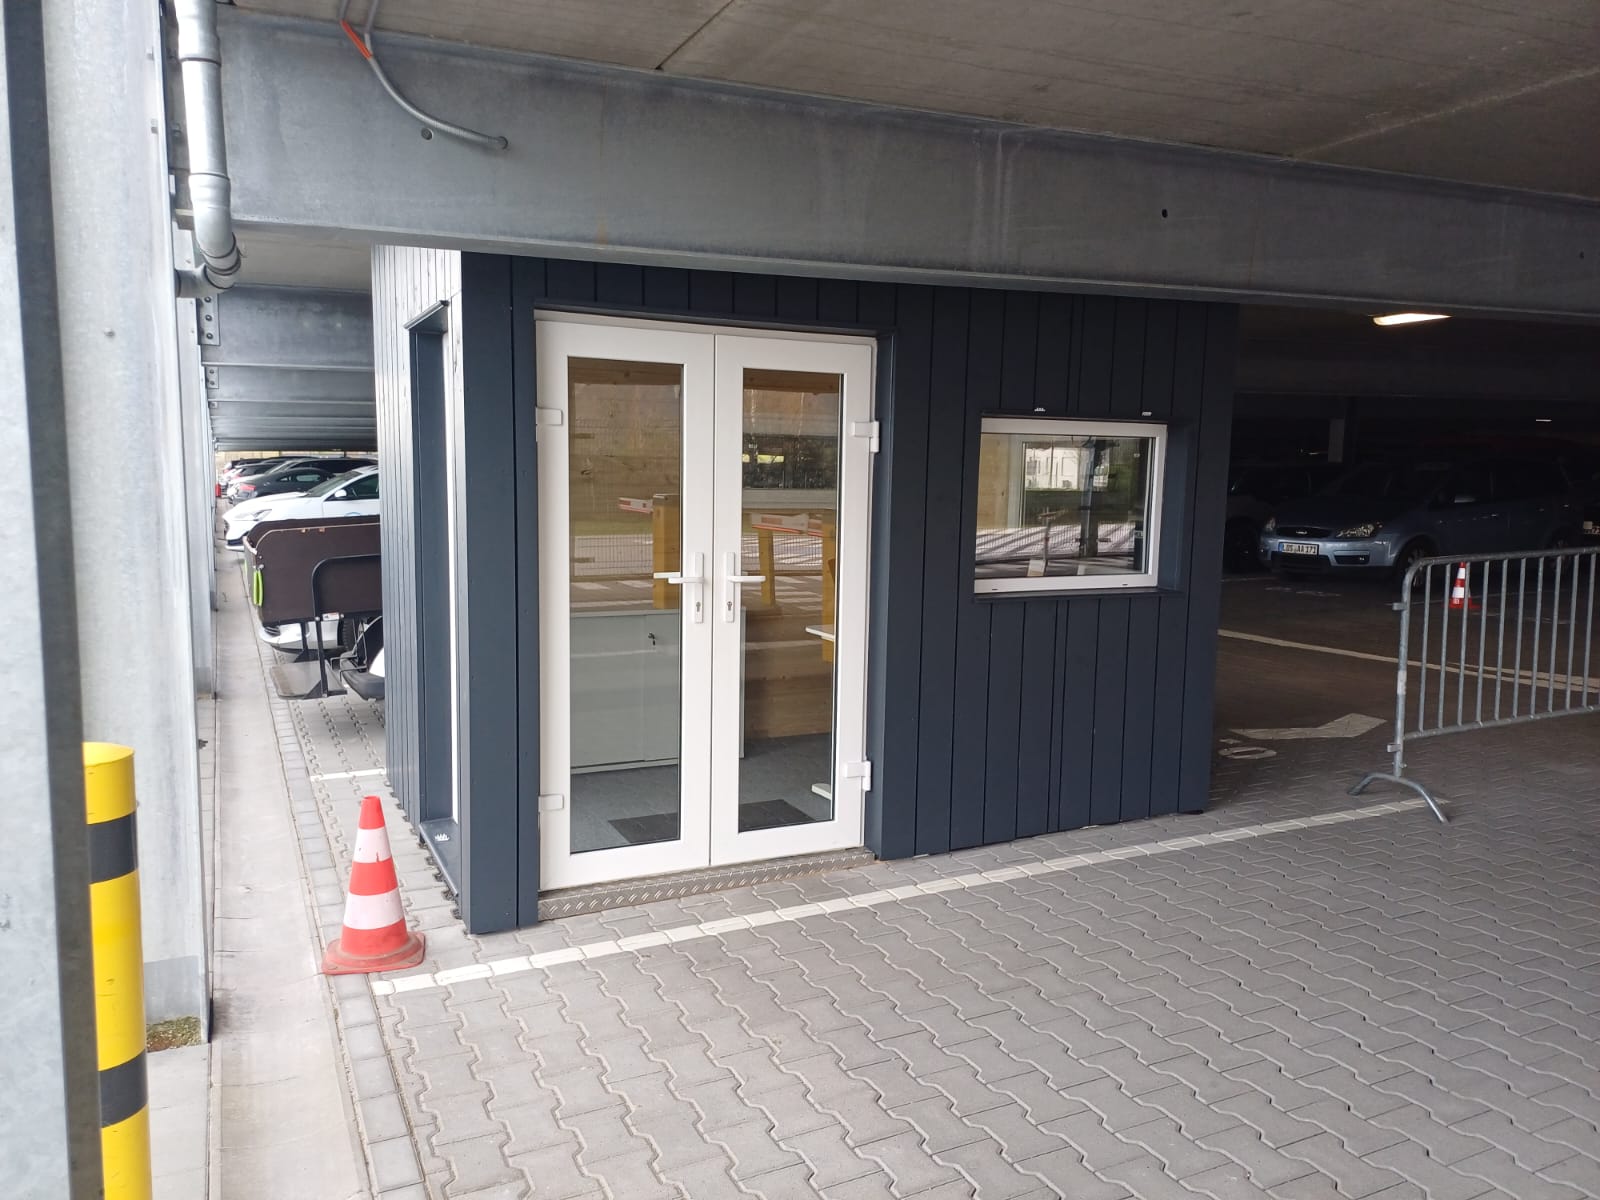 The new service point at the entrance to the McParking car park